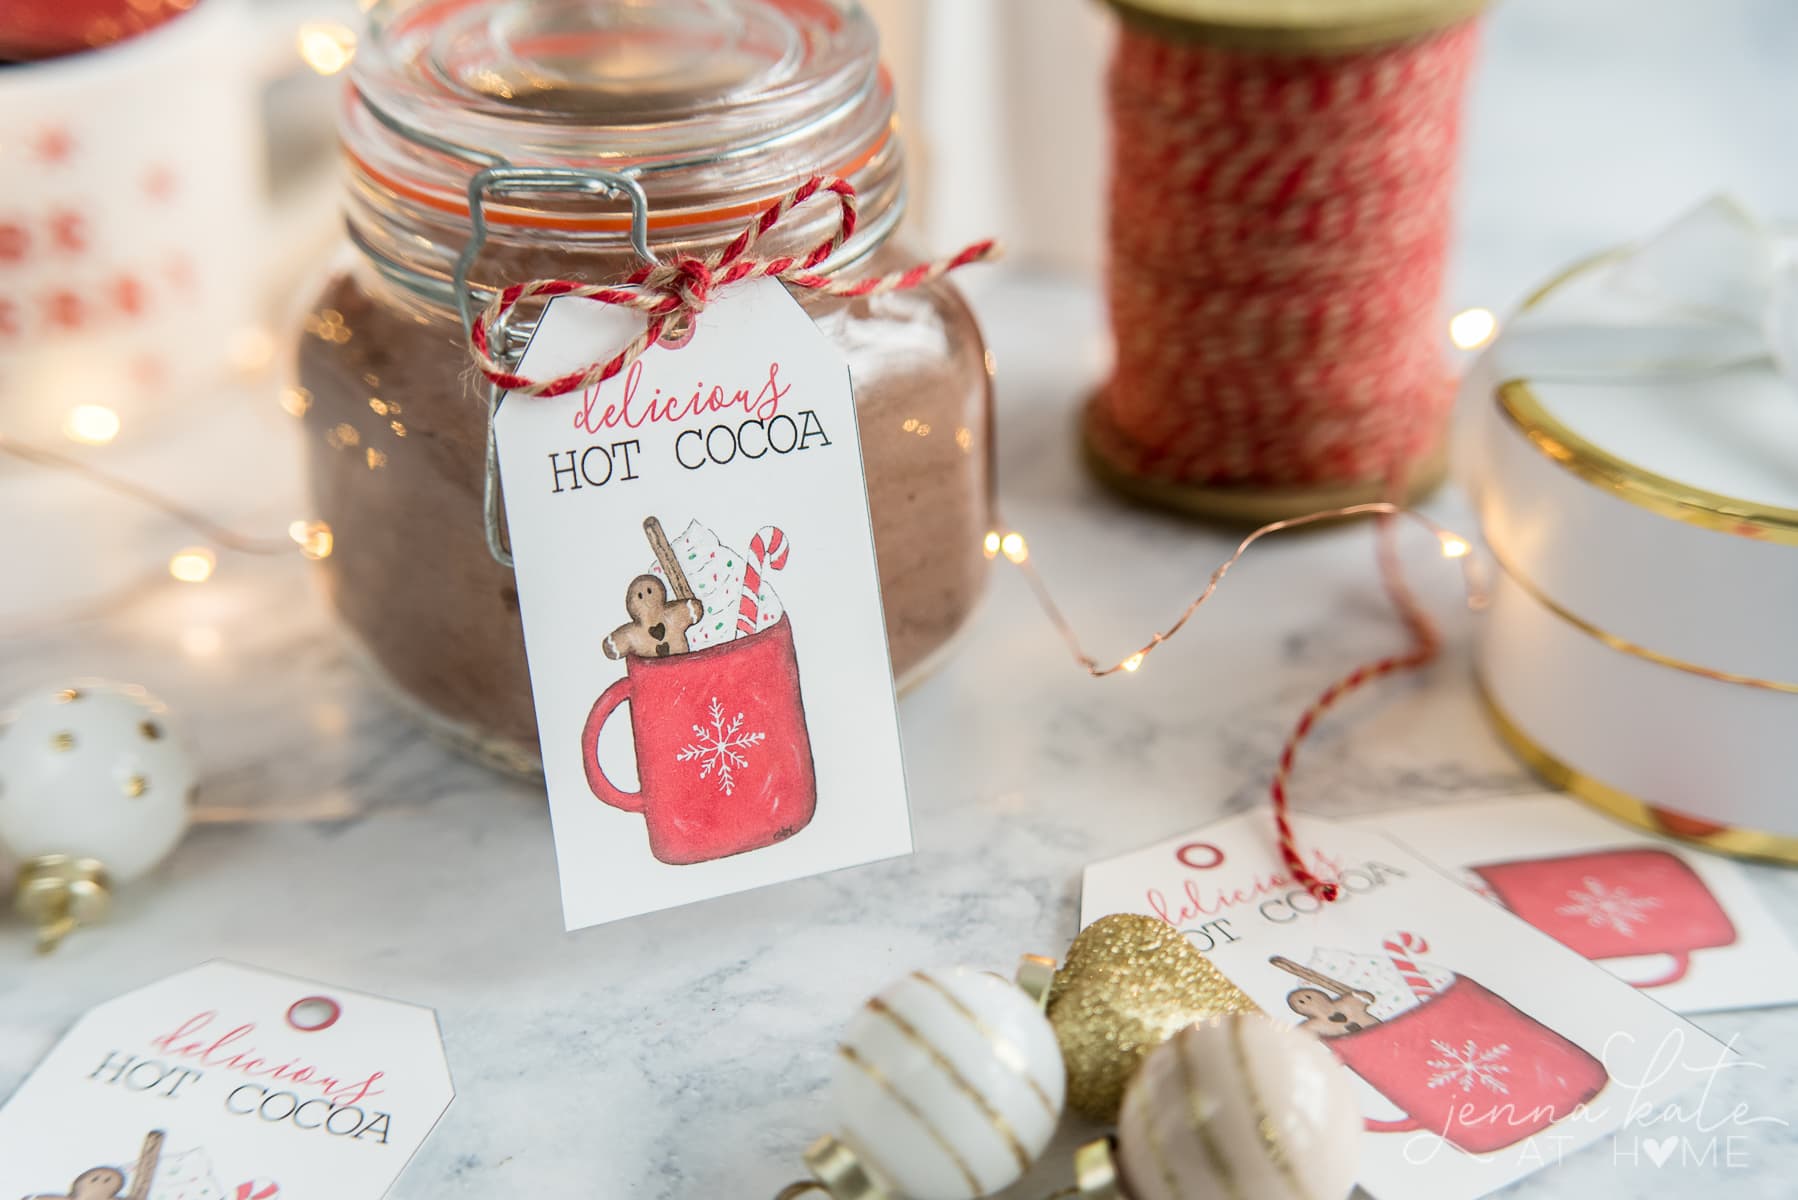 Making a basic glass jar look festive with a cute hot chocolate gift tag to download for free